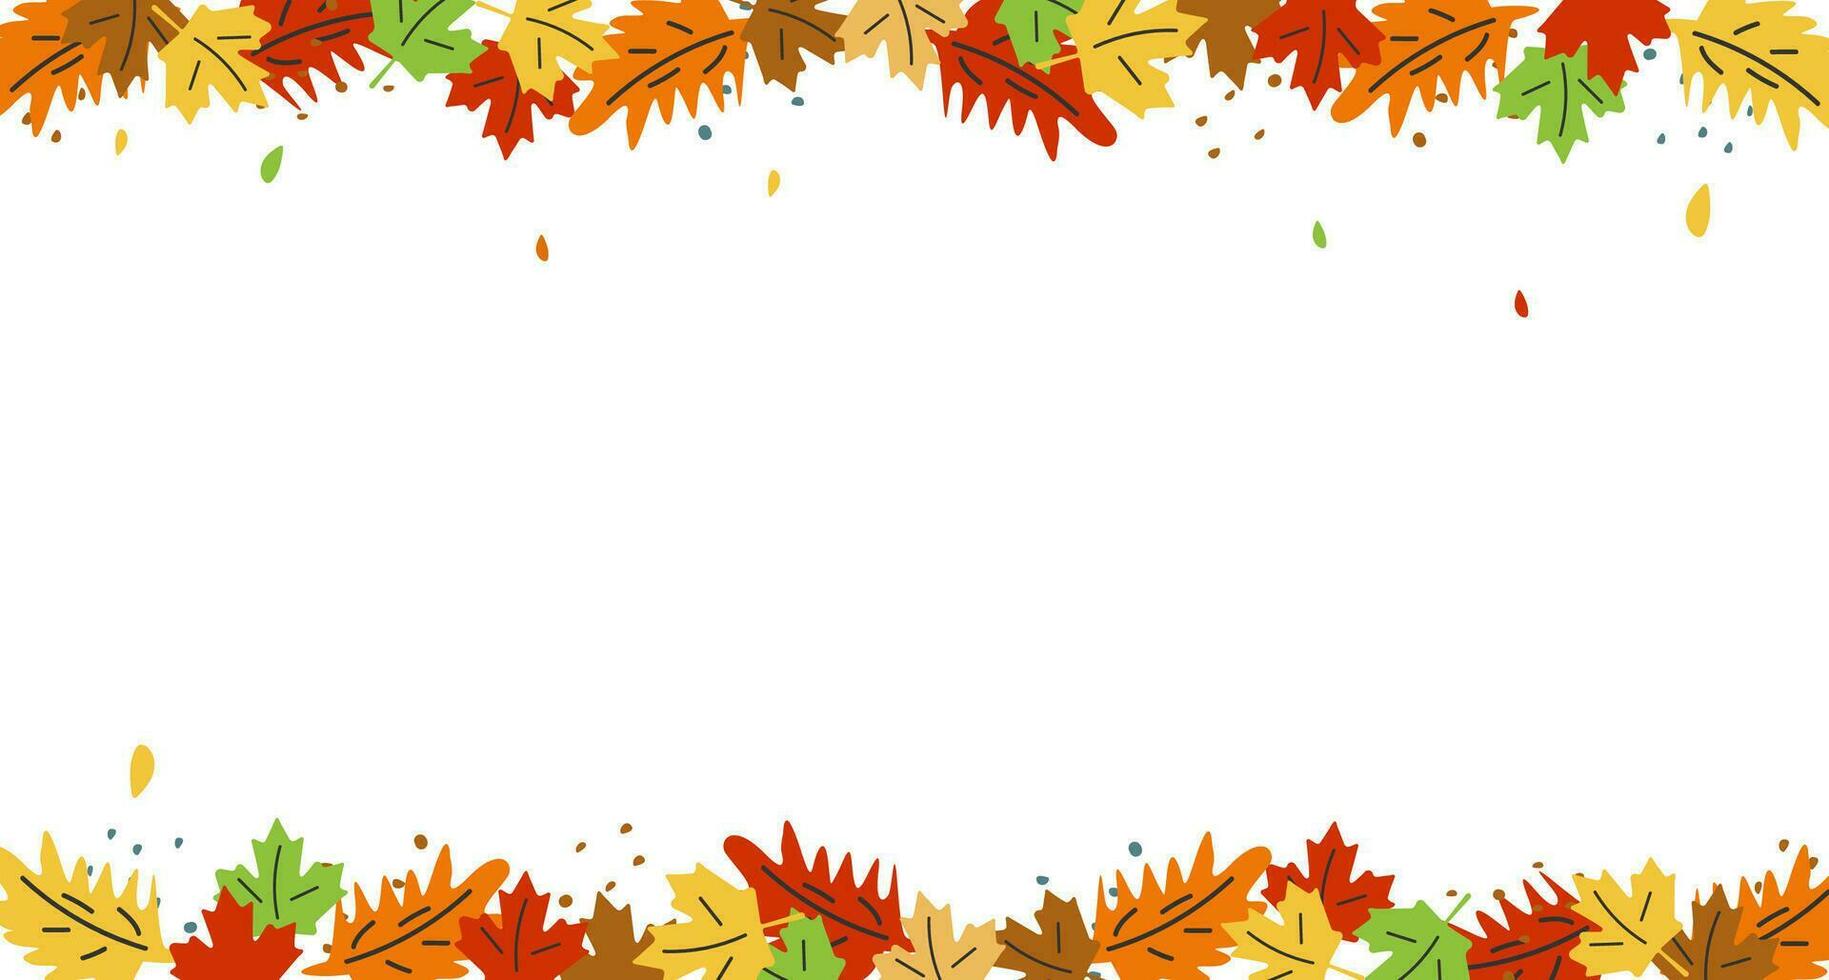 Autumn background with place for your text. Autumn seasonal background with long horizontal border made of falling autumn yellow, red and orange colored leaves isolated on background. Vector